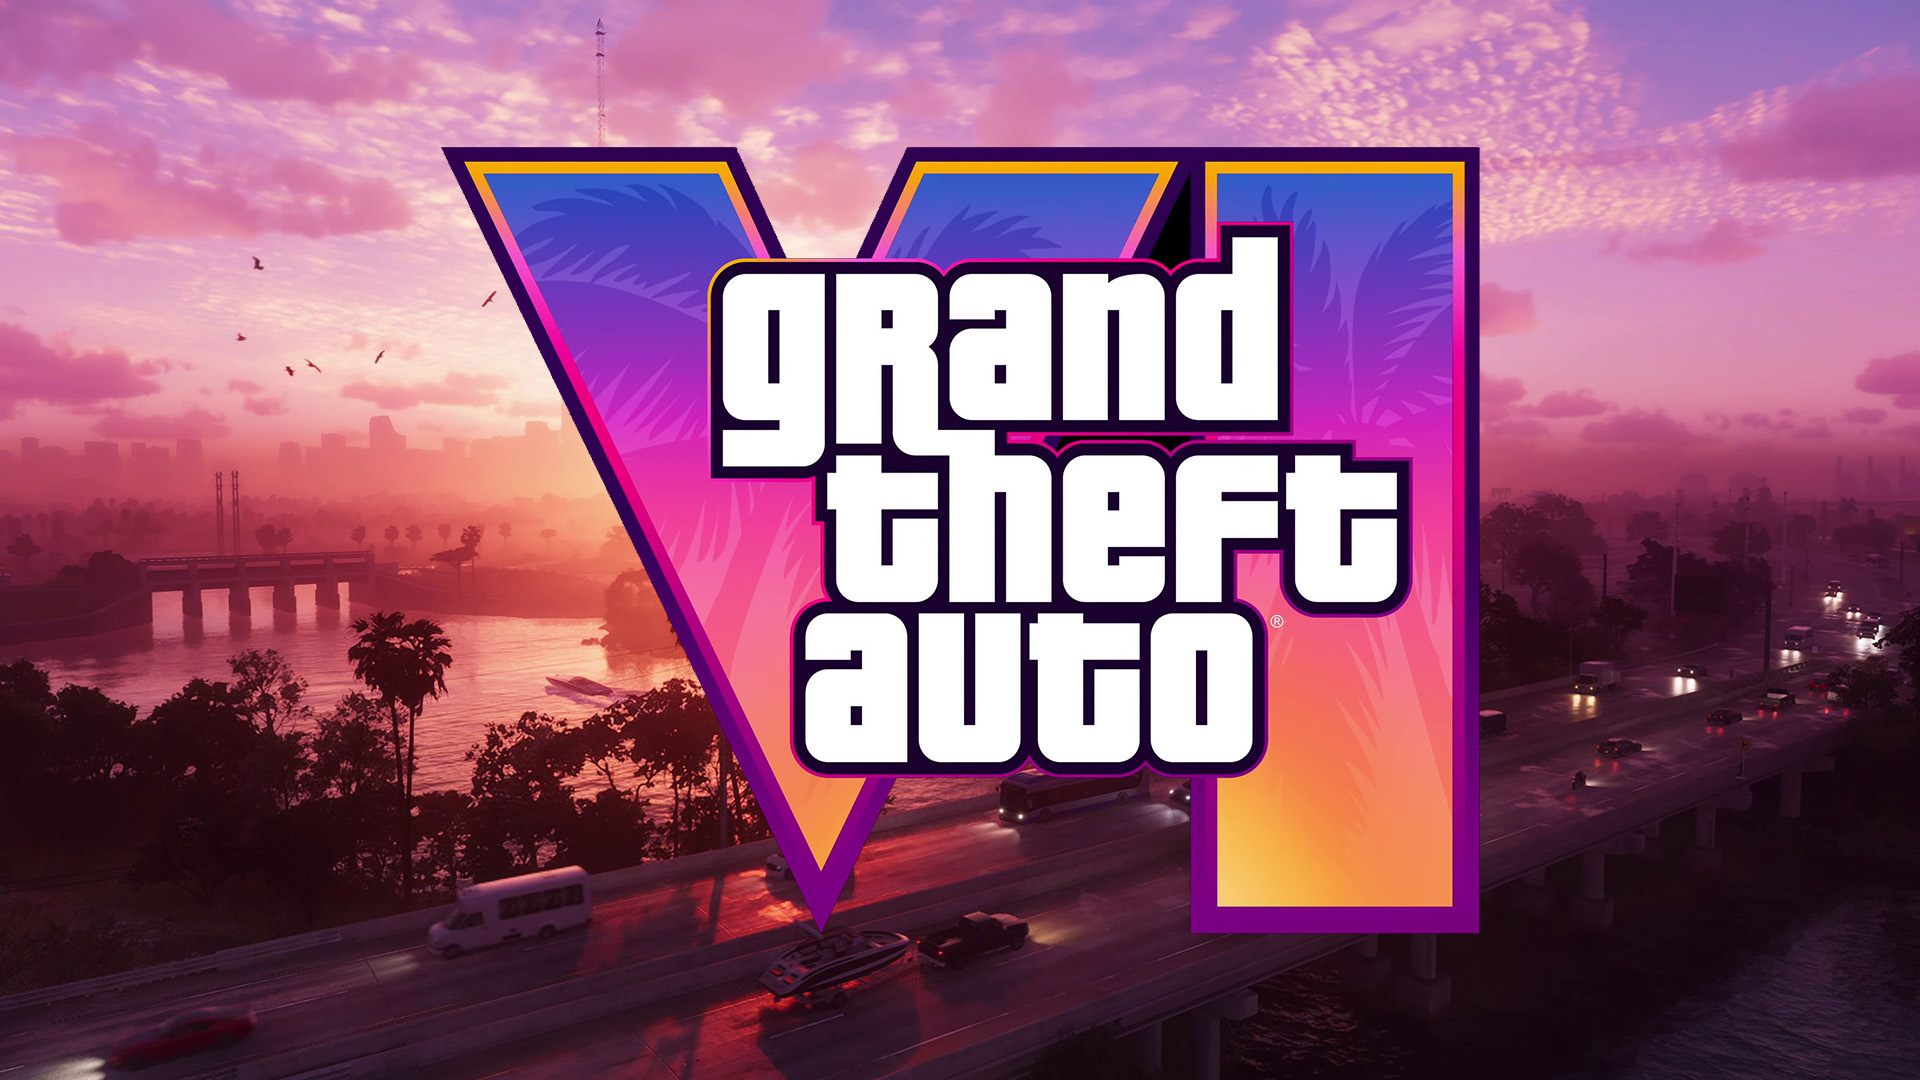 GTA 6 launch teased for consoles beyond PlayStation 5, Xbox Series X